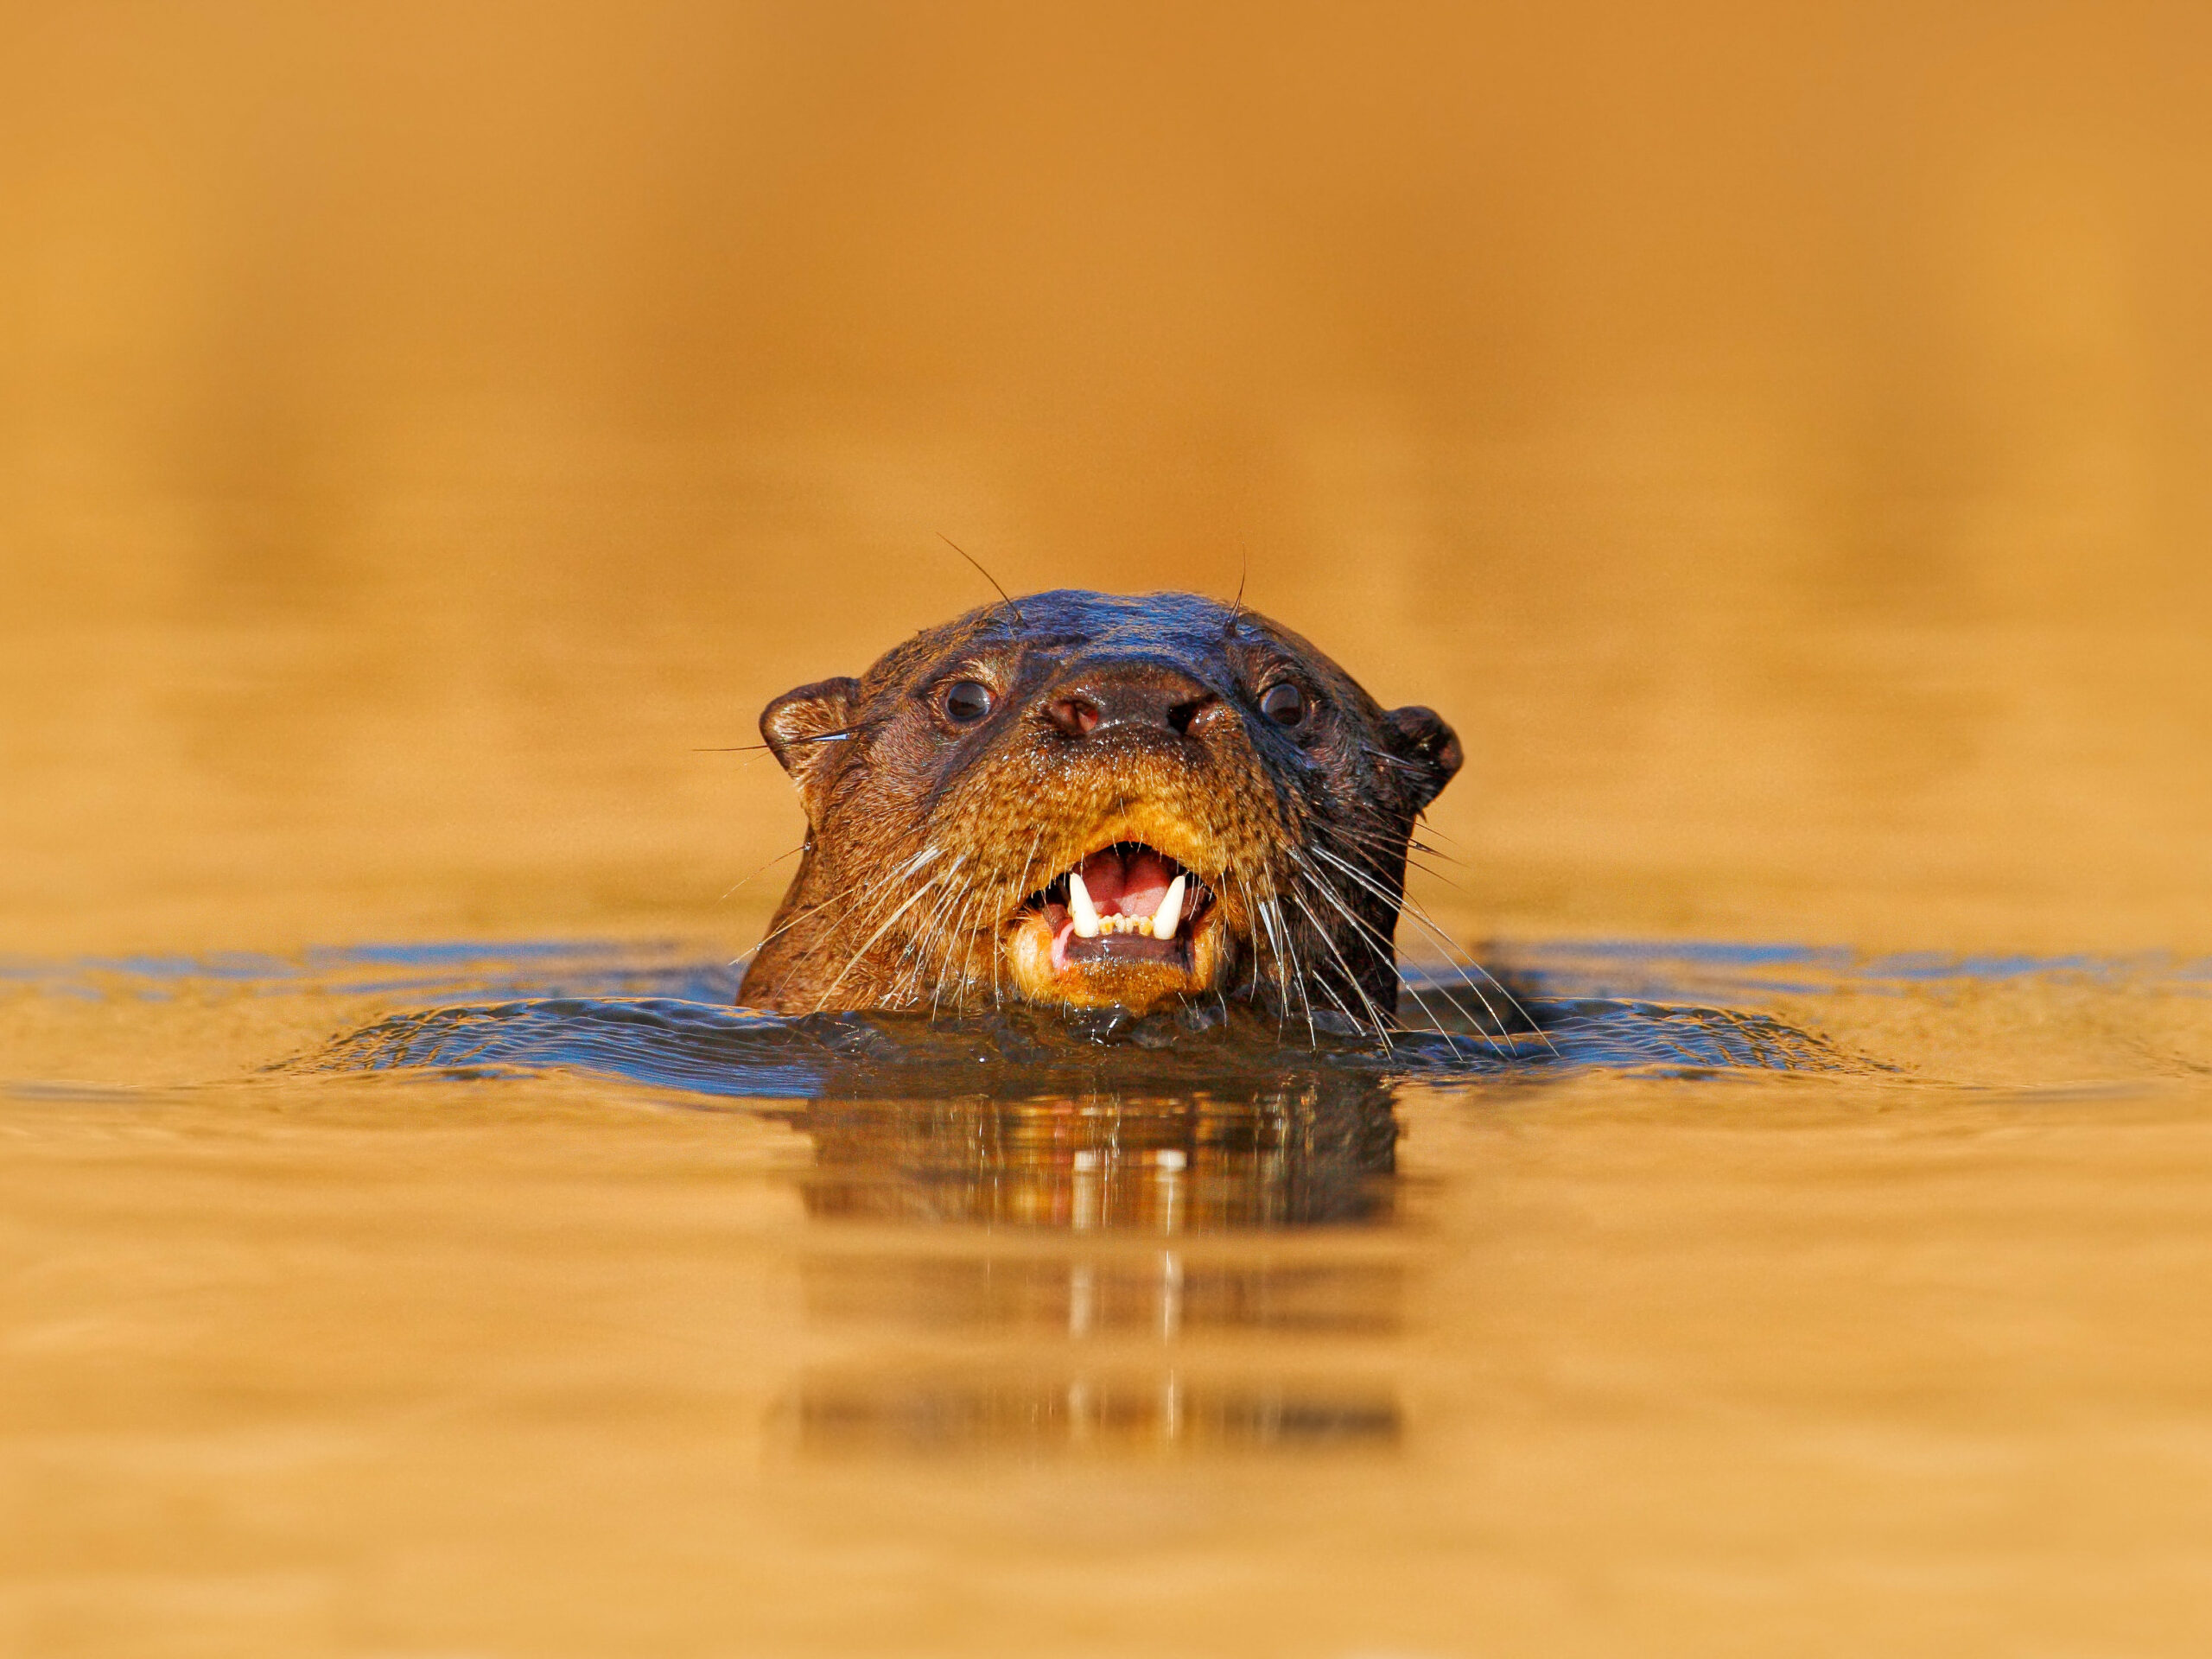 Giant River Otter in the Pantanal